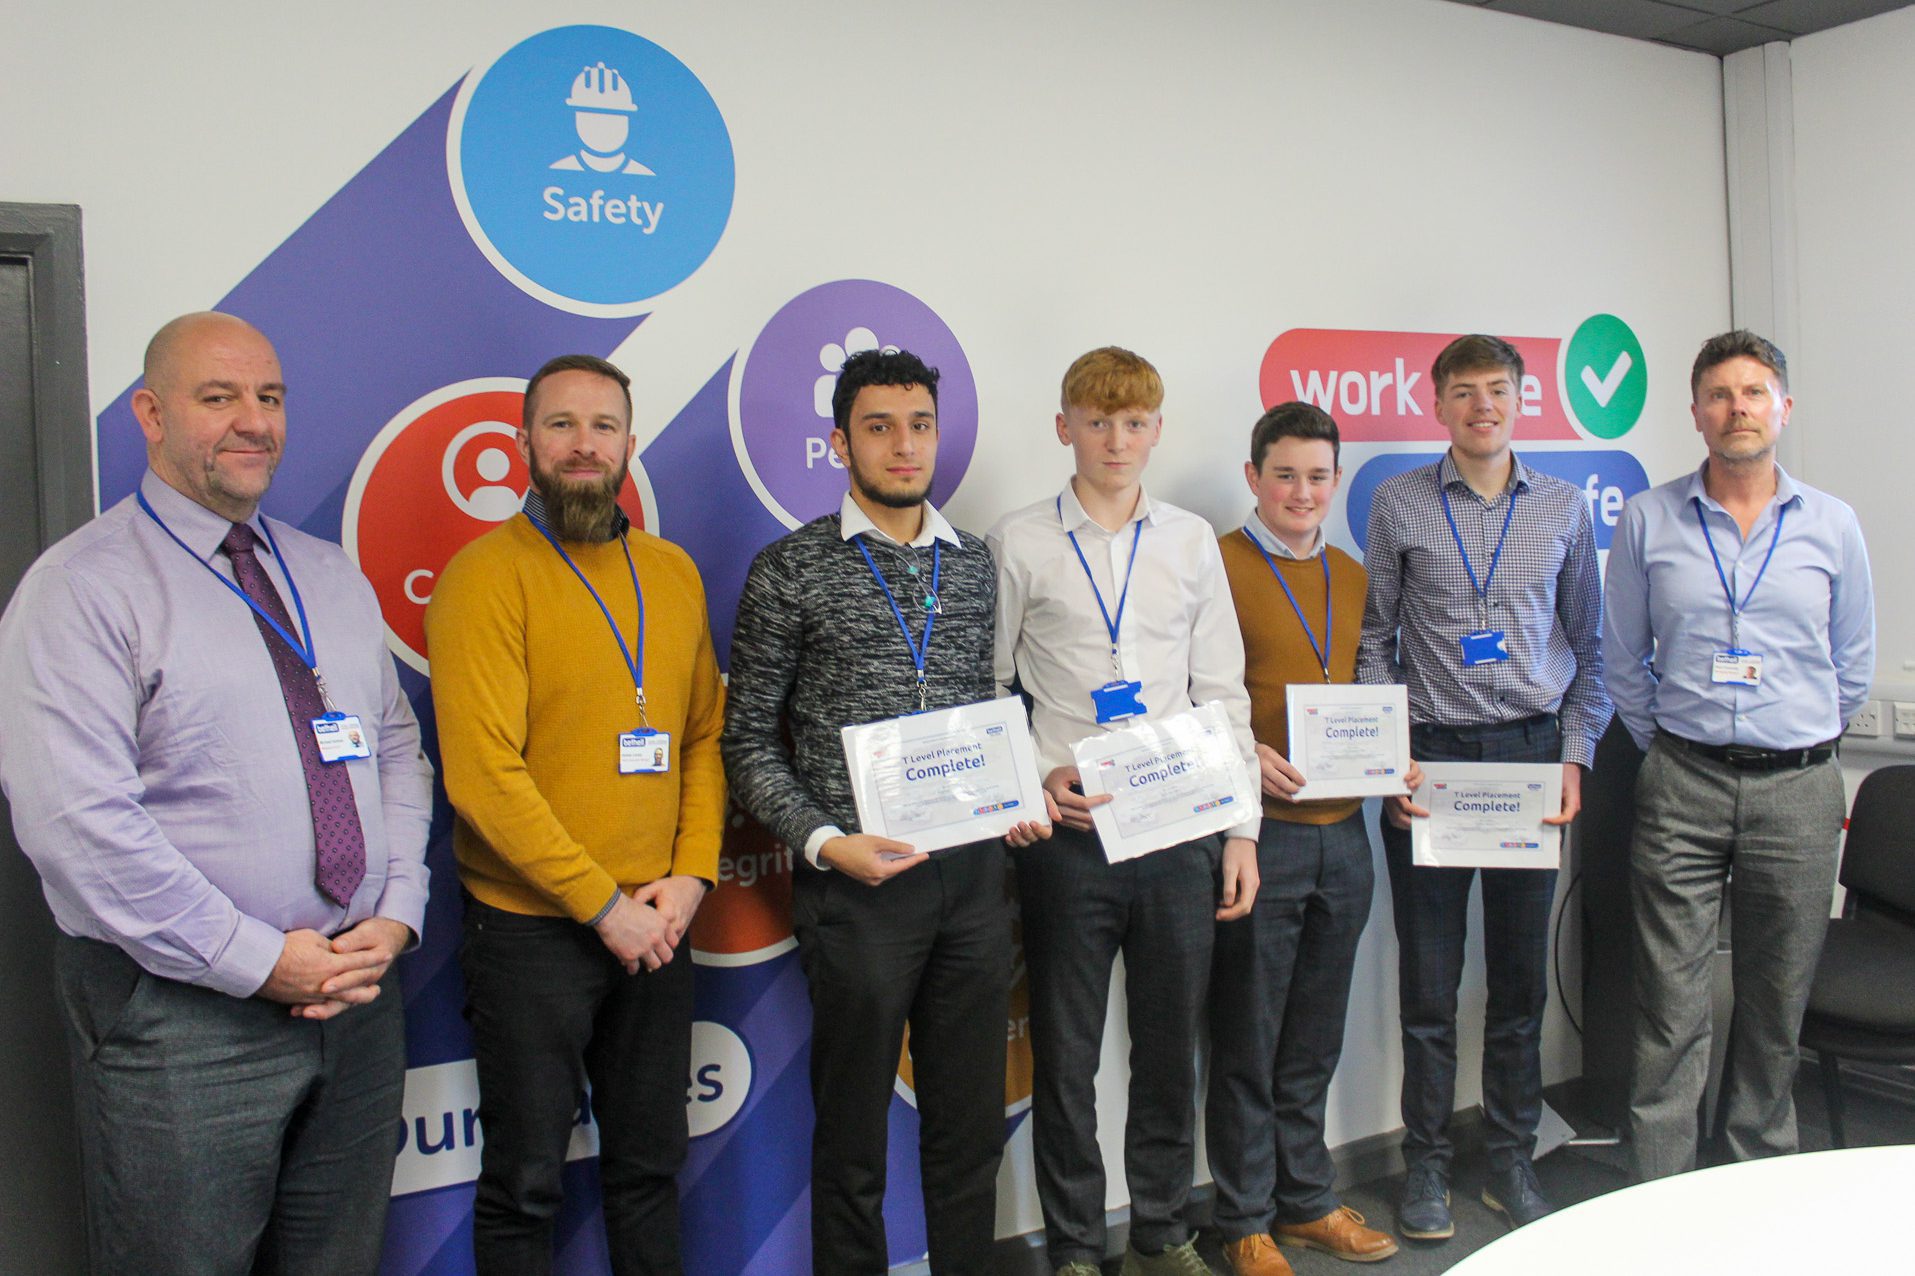 Group of T Level work experience placement students being awarded with completion certificates